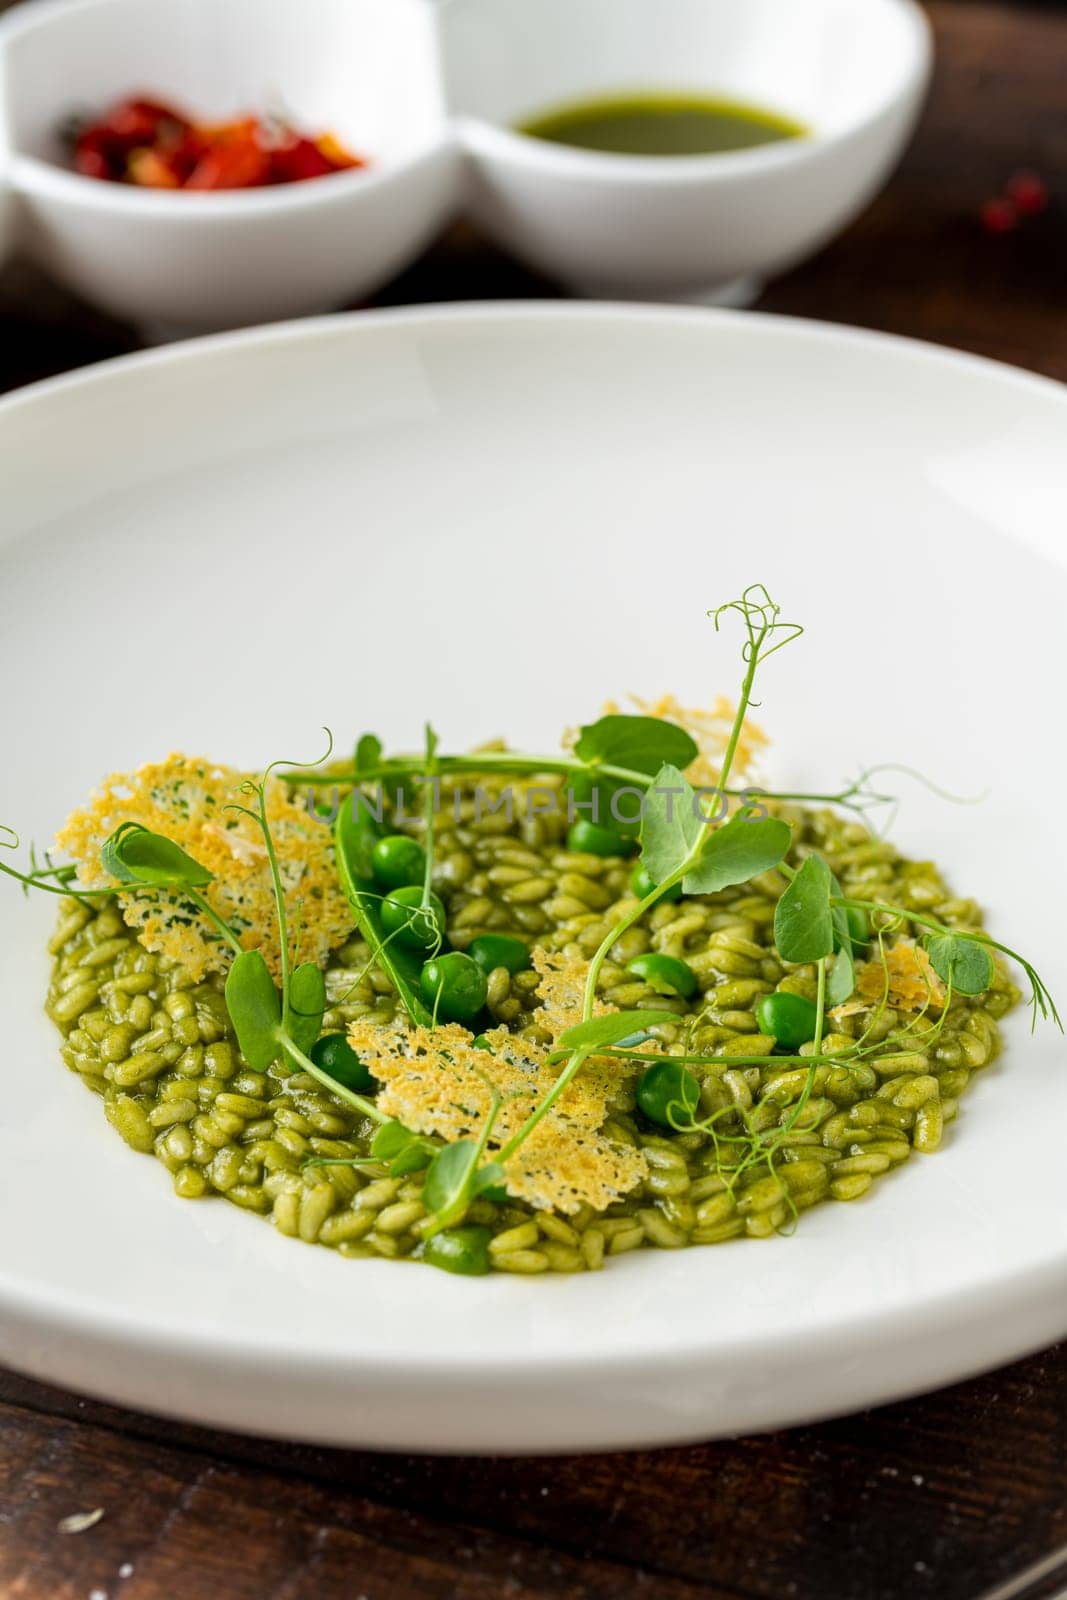 Pea risotto on a white porcelain plate in a fine dining restaurant